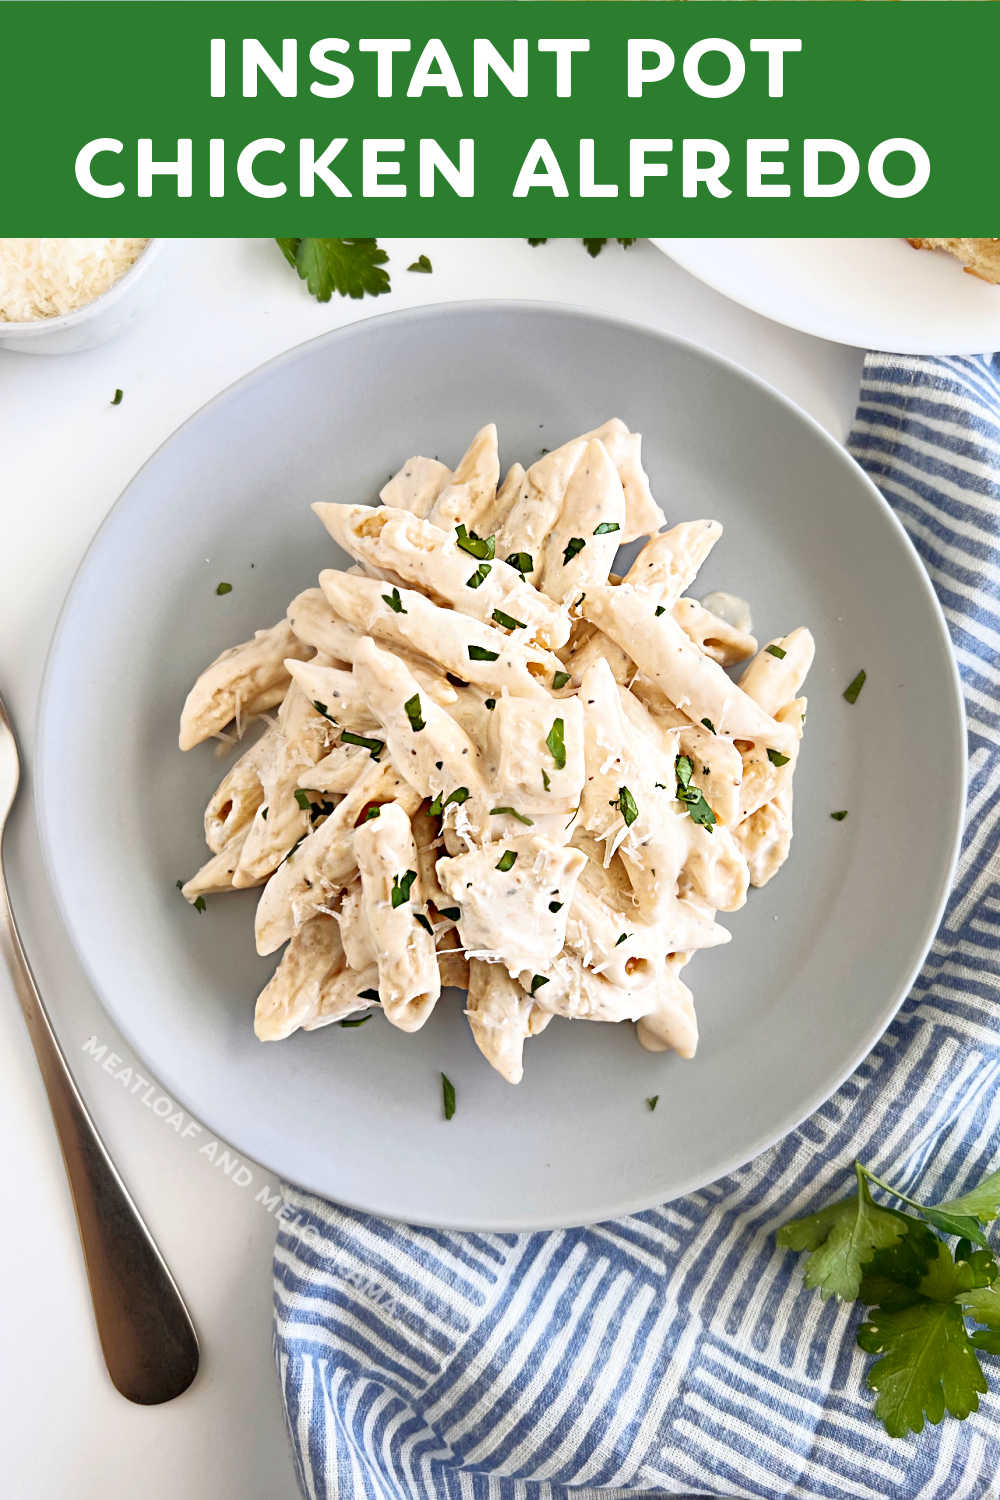 Instant Pot Chicken Alfredo pasta is an easy dinner made with tender cut up chicken breasts and penne in a creamy homemade Alfredo sauce. Your whole family will love this easy recipe that's perfect for a busy weeknight! via @meamel